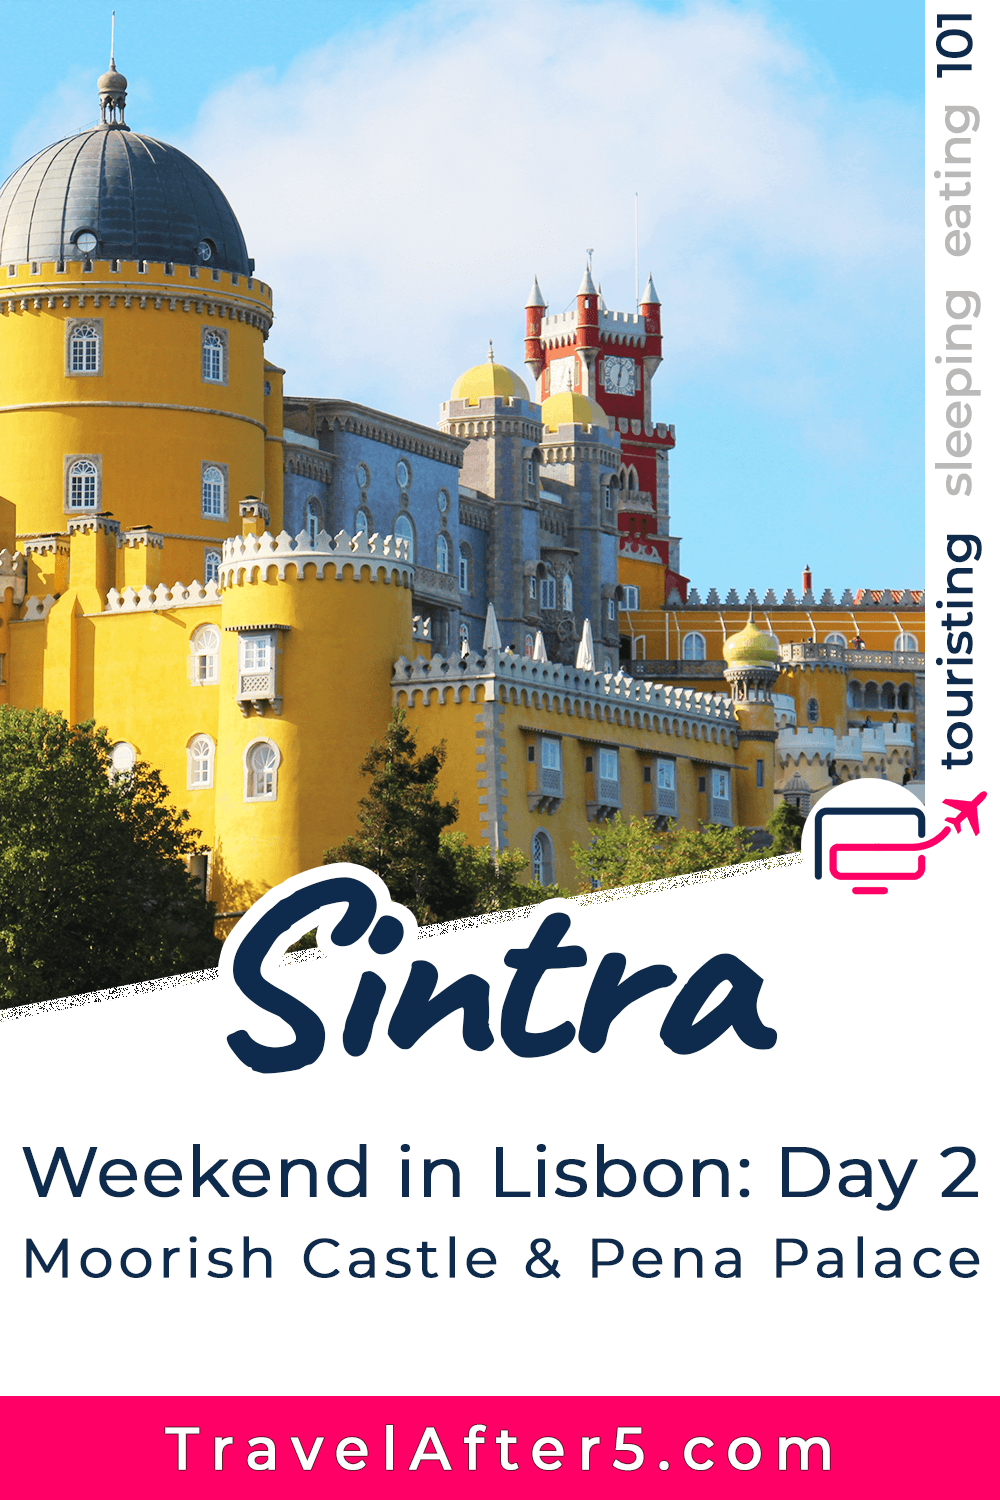 Lisbon in One Weekend: Day 2 - Sintra (Moorish Castle, Pena Palace & Sintra National Palace), by Travel After 5